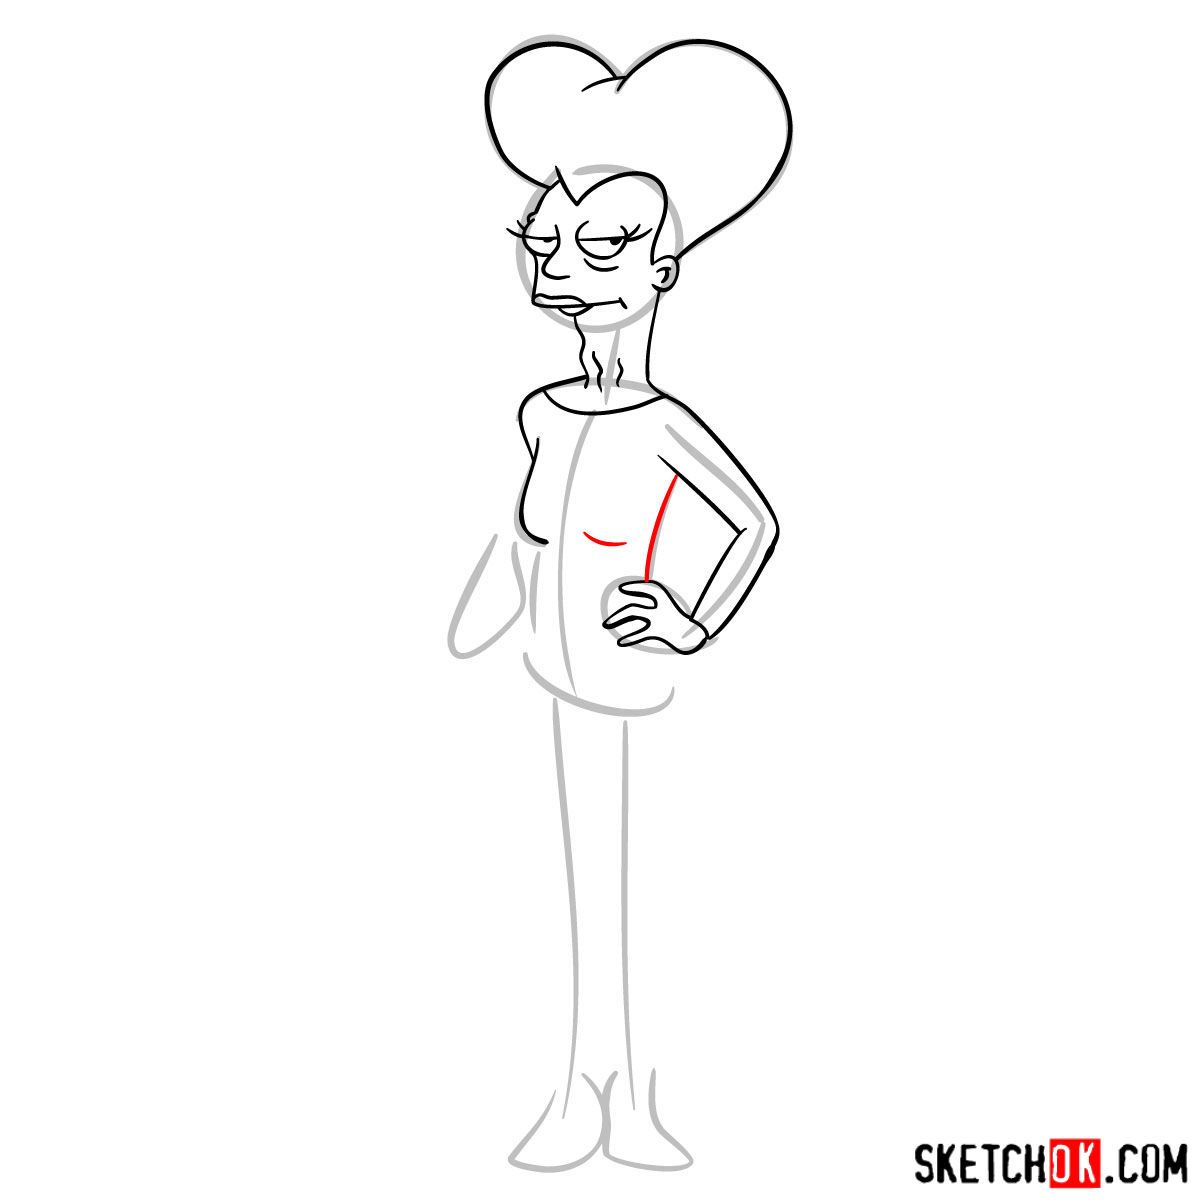 How to draw Mom from Futurama - step 07